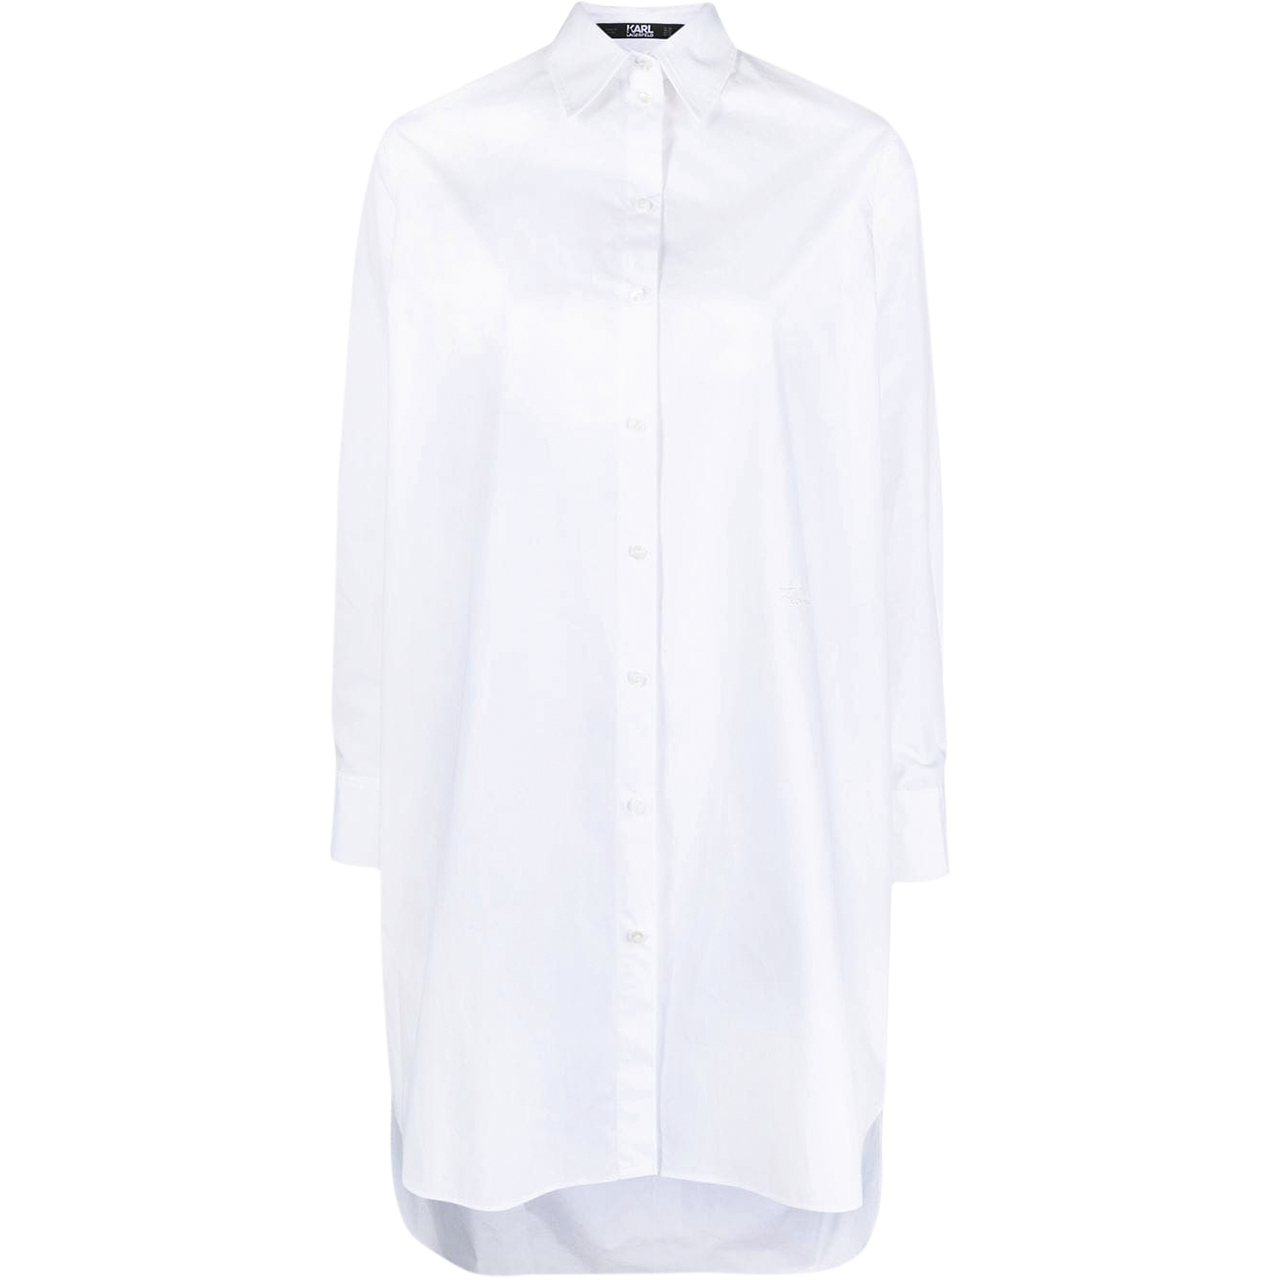 Here’s How To Style The Classic White Button-Down Shirt | Shopping